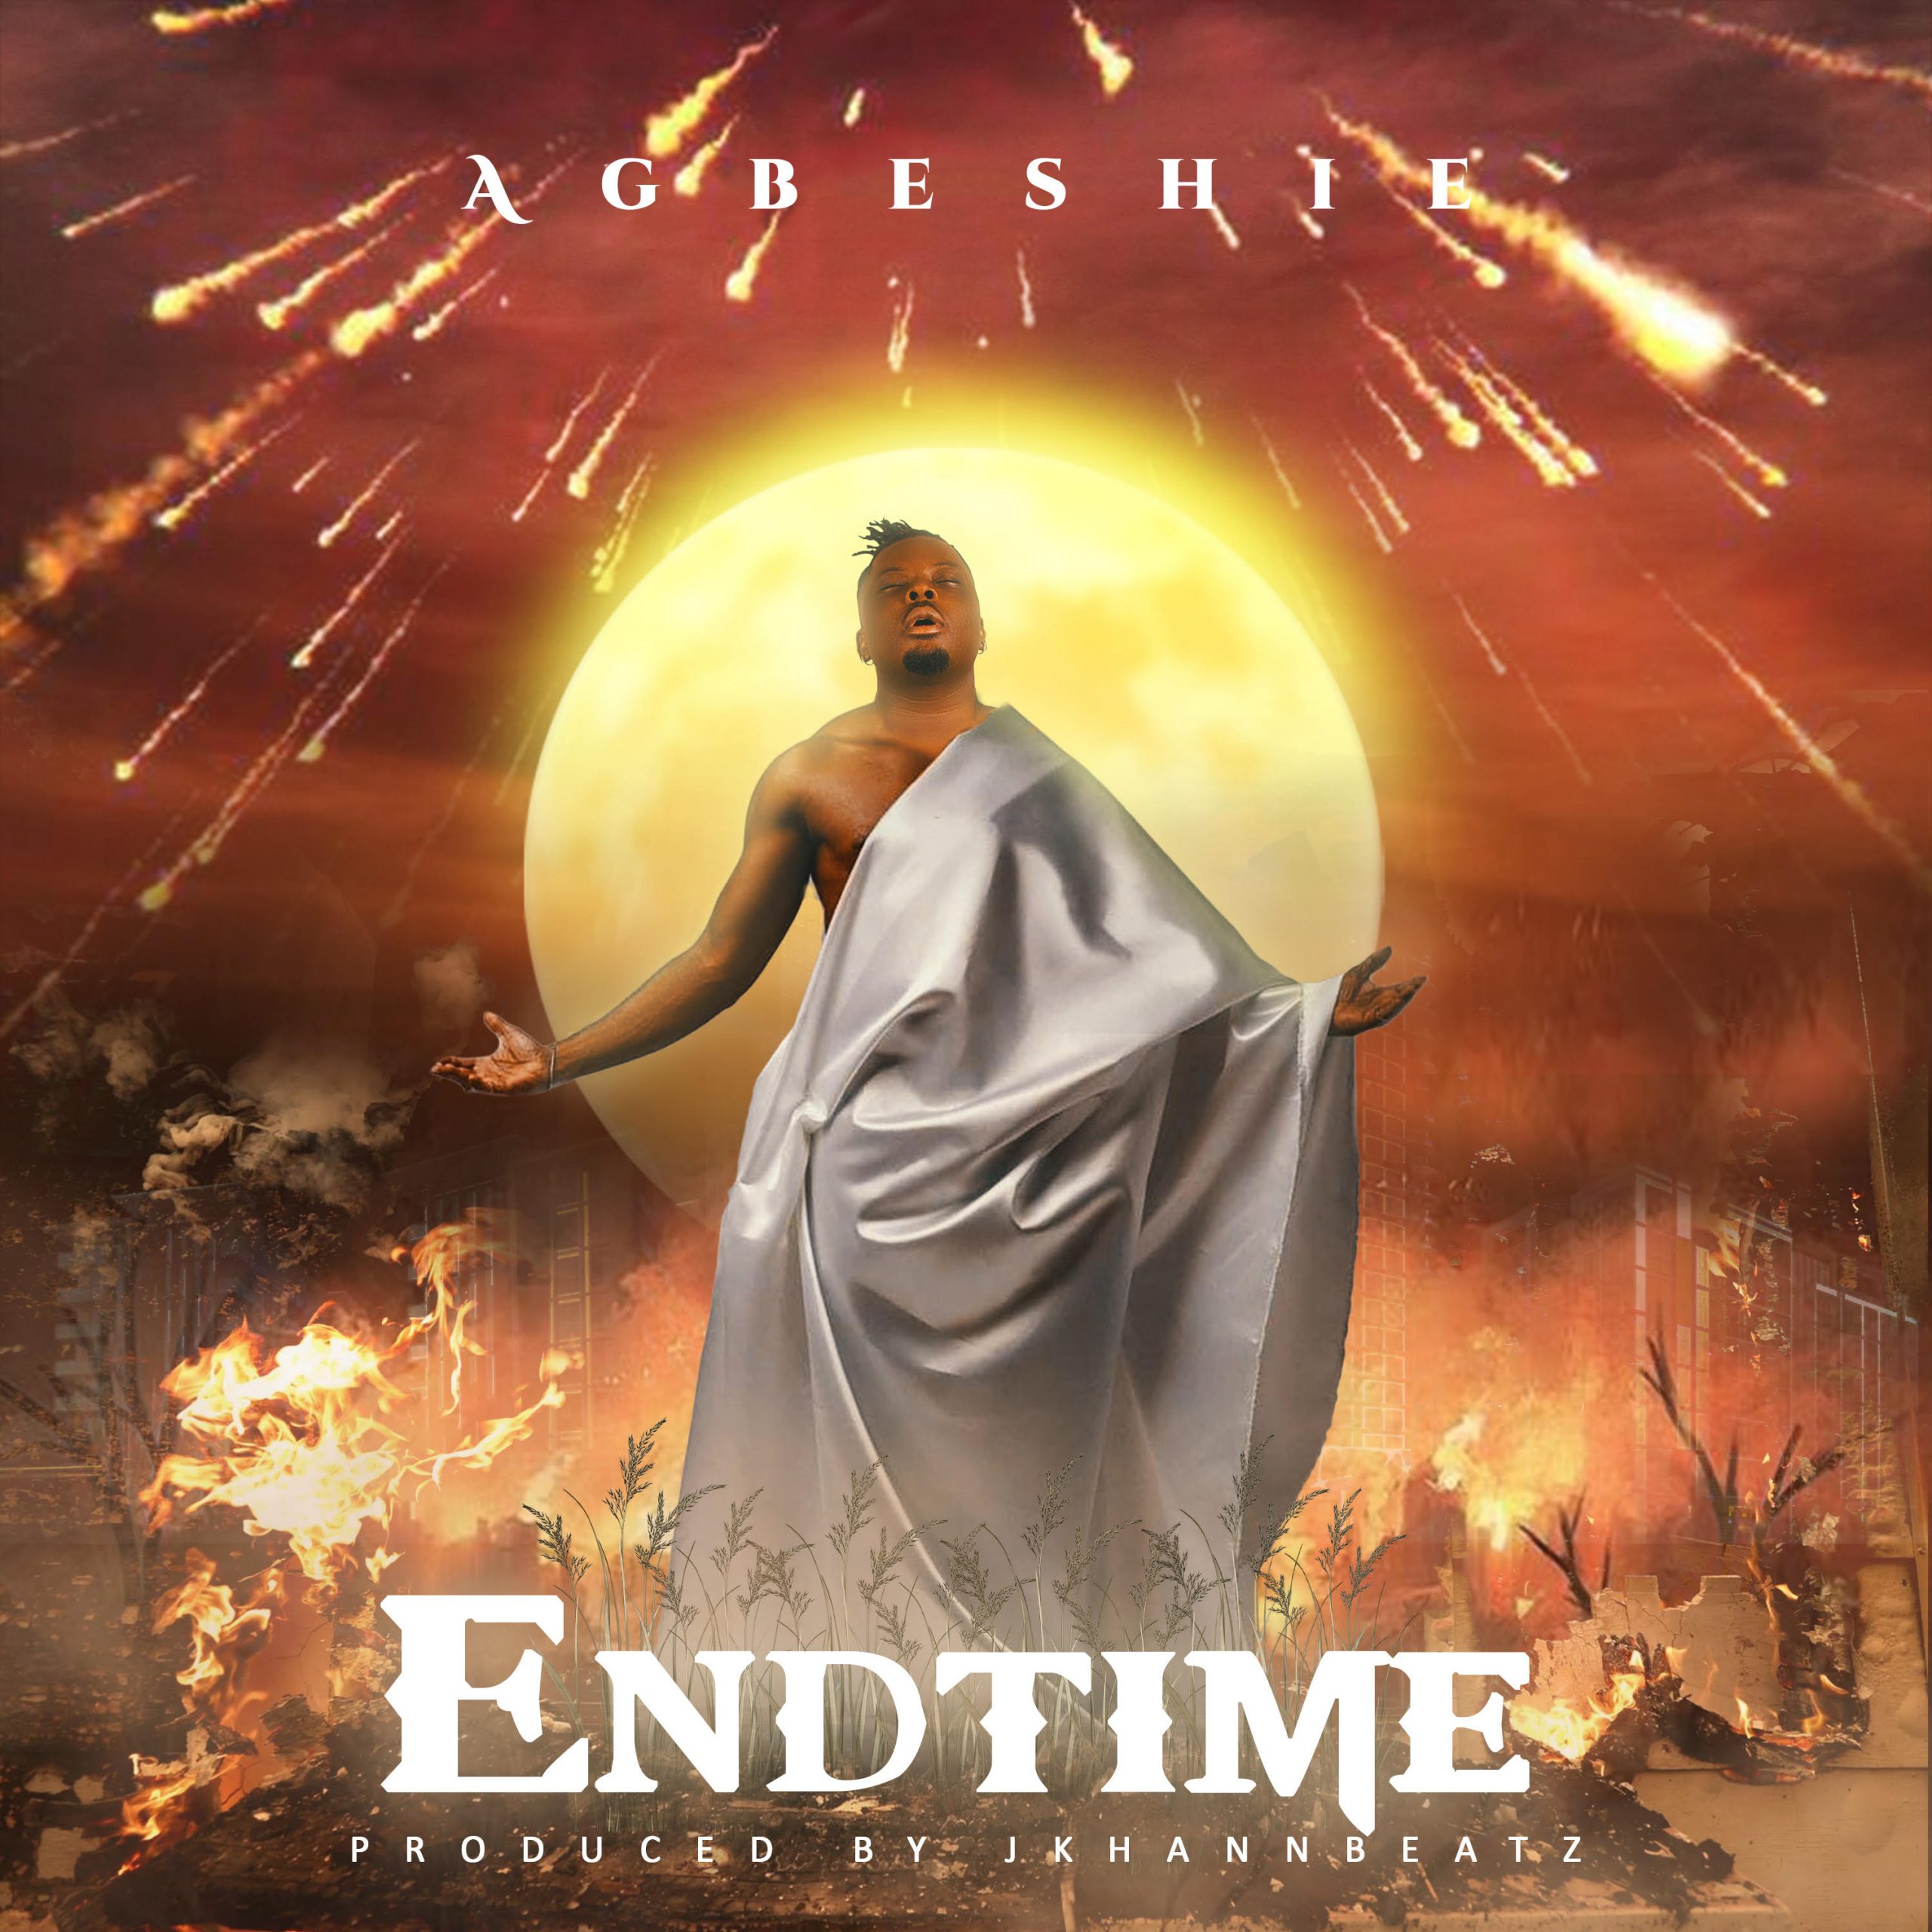 Agbeshie Shares Life Experience In New song “End Time” – LISTEN.